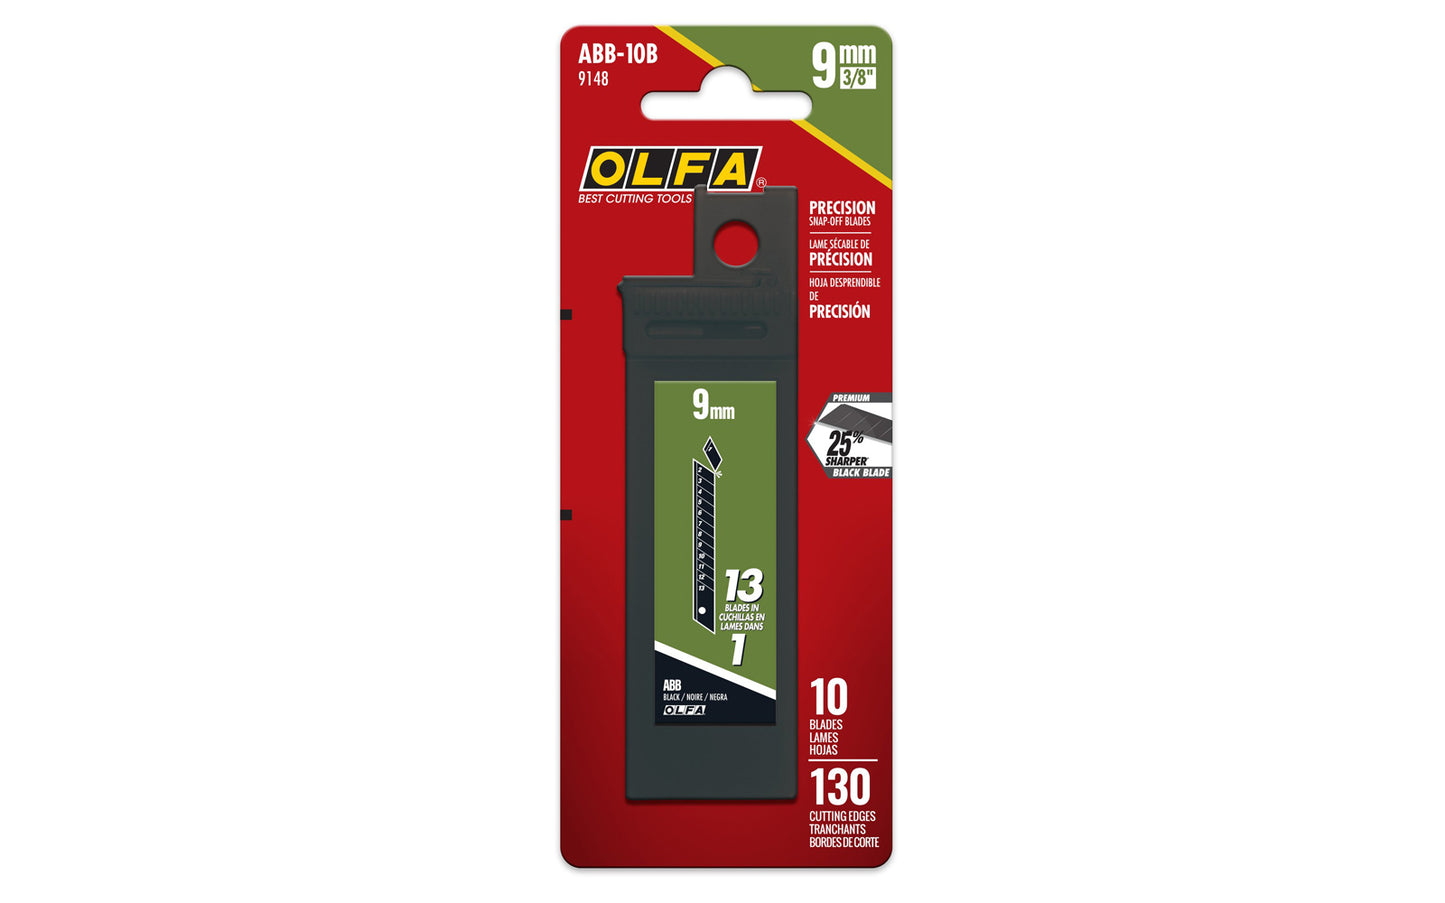 Olfa "ABB-10B" 9 mm Replacement Black Blades - 10 Pack are sharper than standard silver blades by up to 25%. These precision blades are made with premium carbon tool steel from Japan & are honed on both sides of the blade for professional grade cutting. 091511600384. Olfa Model ABB-10B. 10 Blades in Pack. Made in Japan